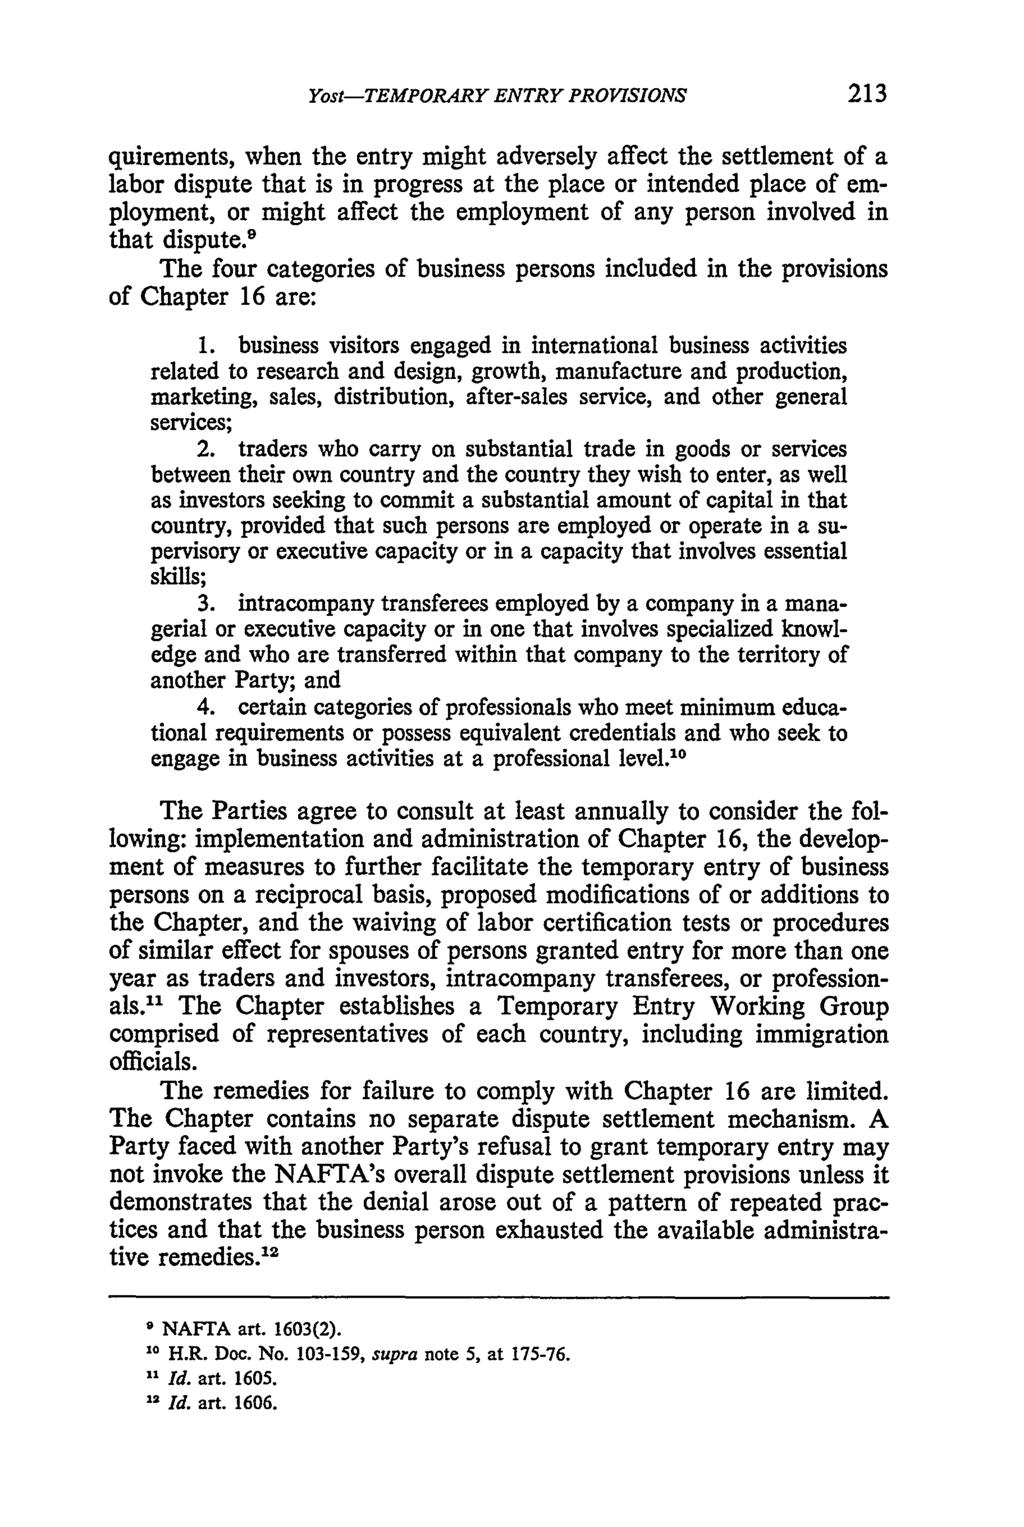 Yost: NAFTA--Temporary Entry Provisions--Immigration Dimensions Yost-TEMPORARY ENTRY PROVISIONS quirements, when the entry might adversely affect the settlement of a labor dispute that is in progress